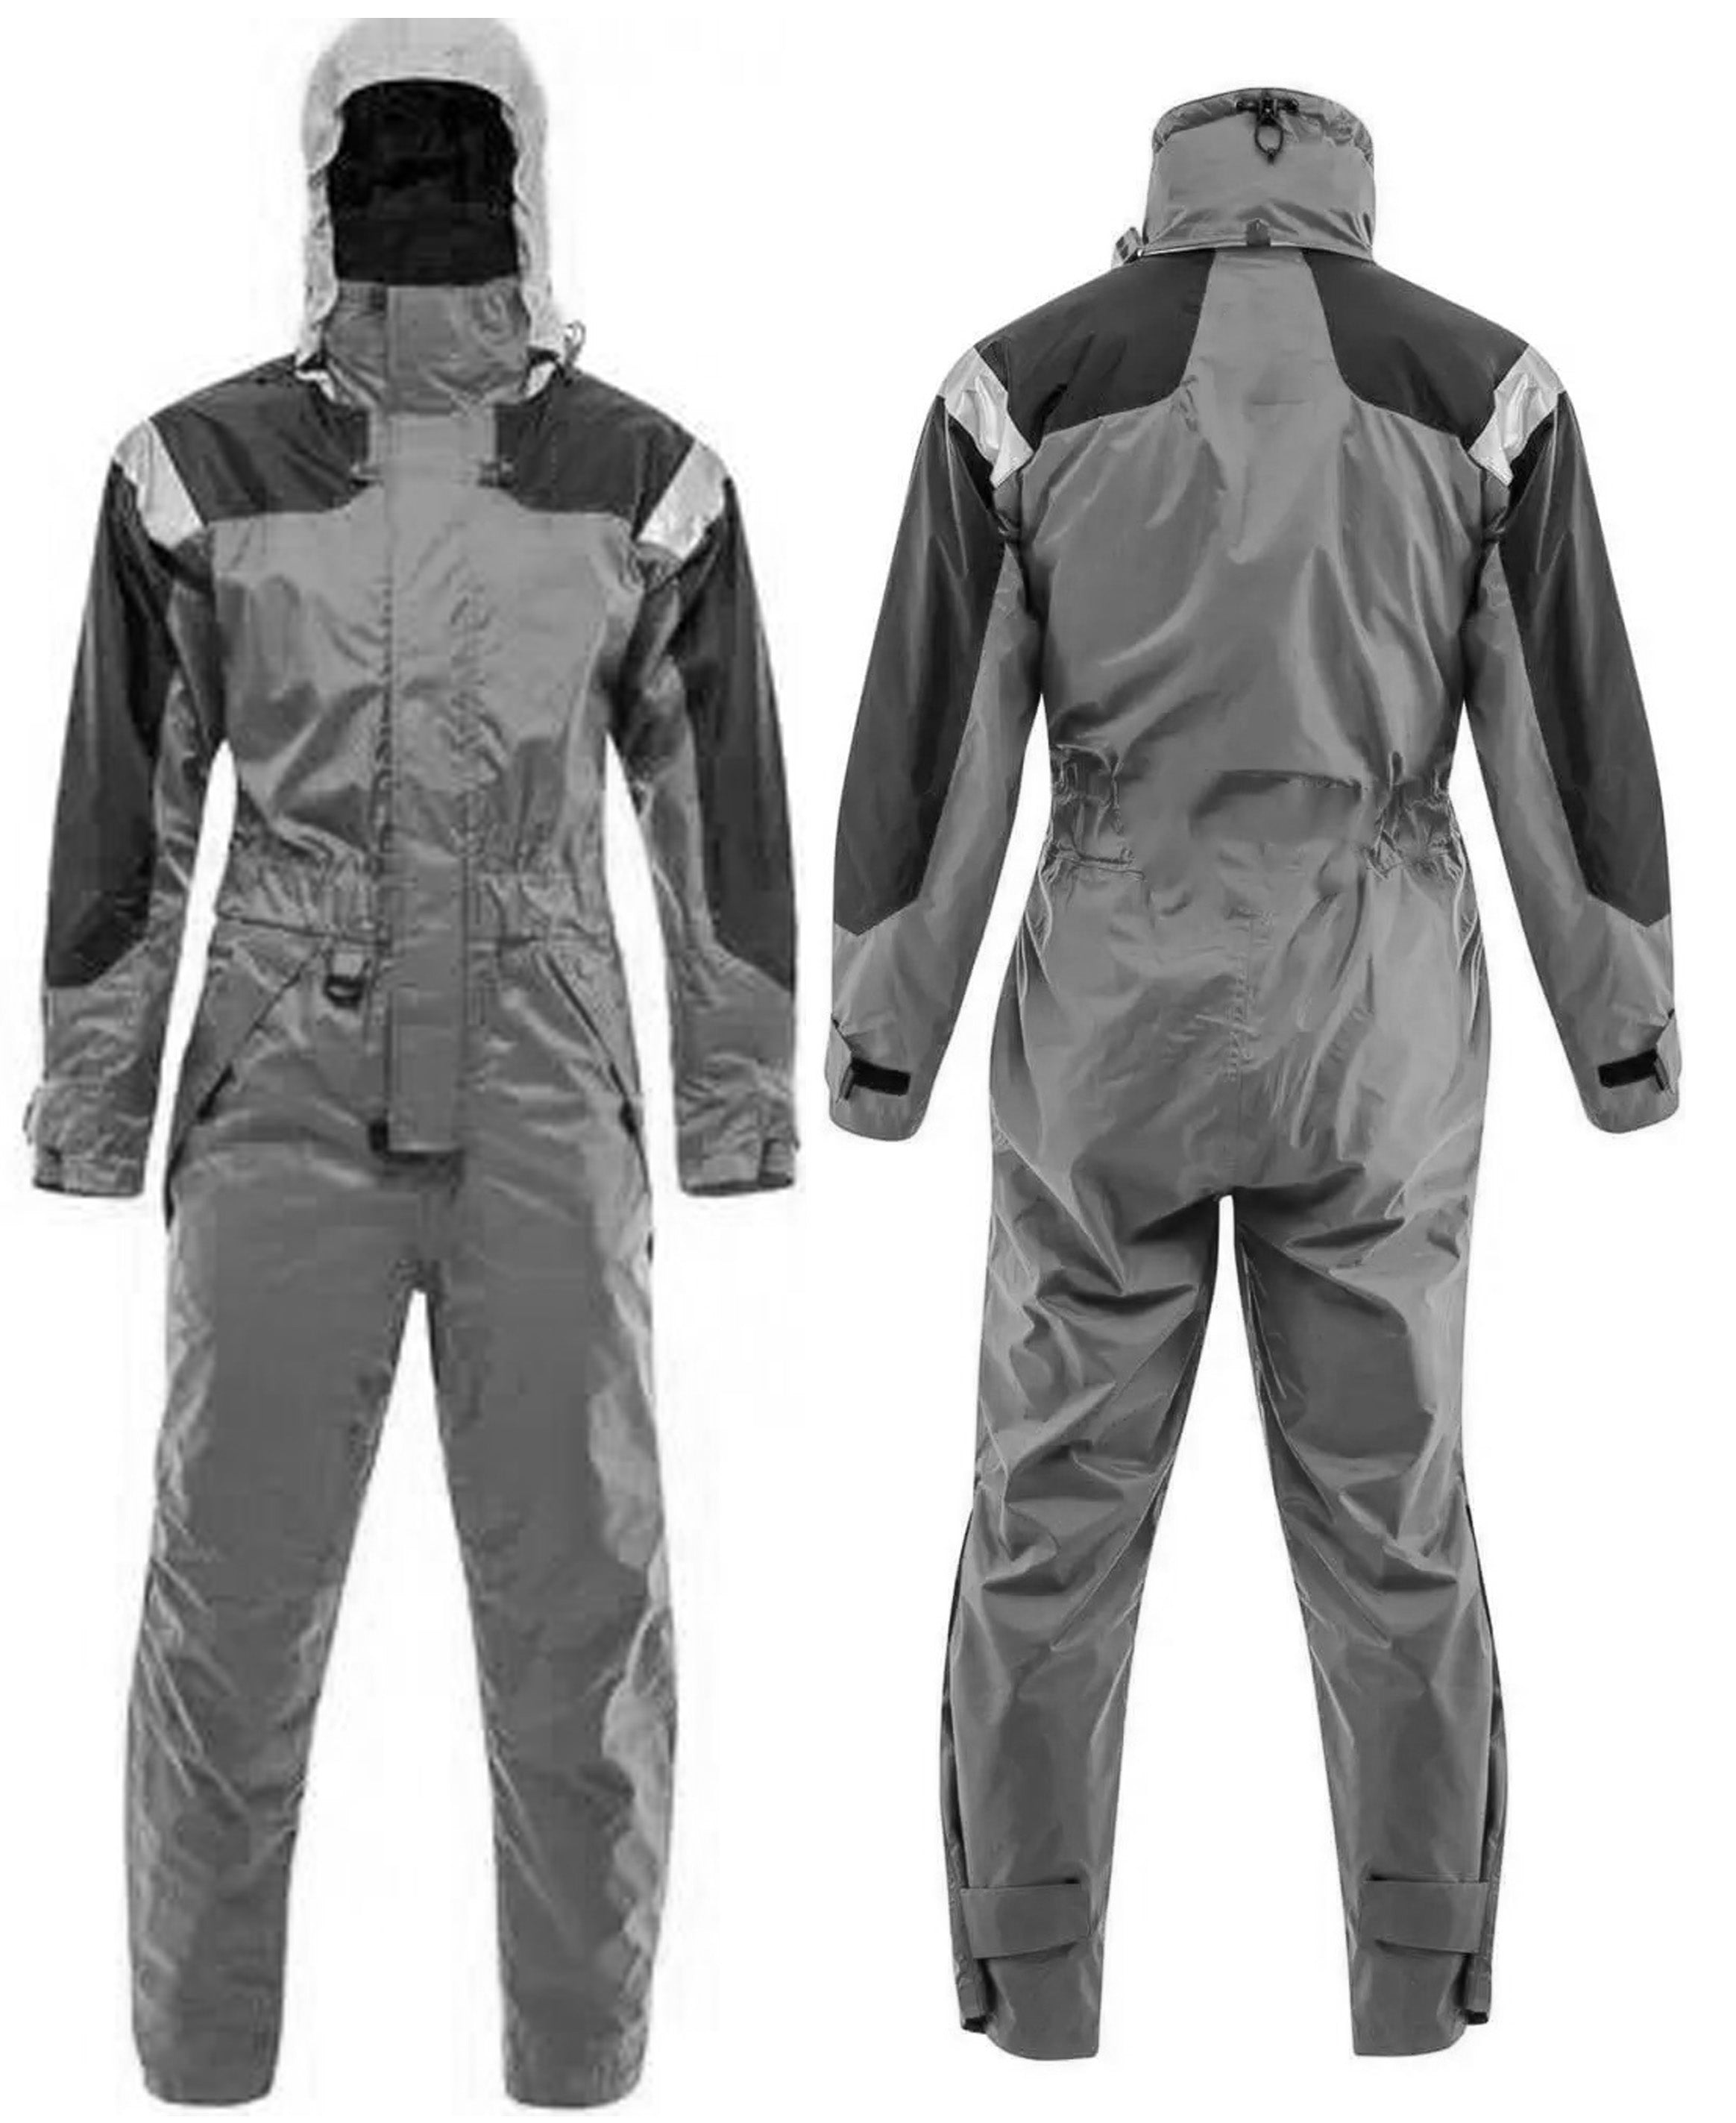 Flotation suits in gray color